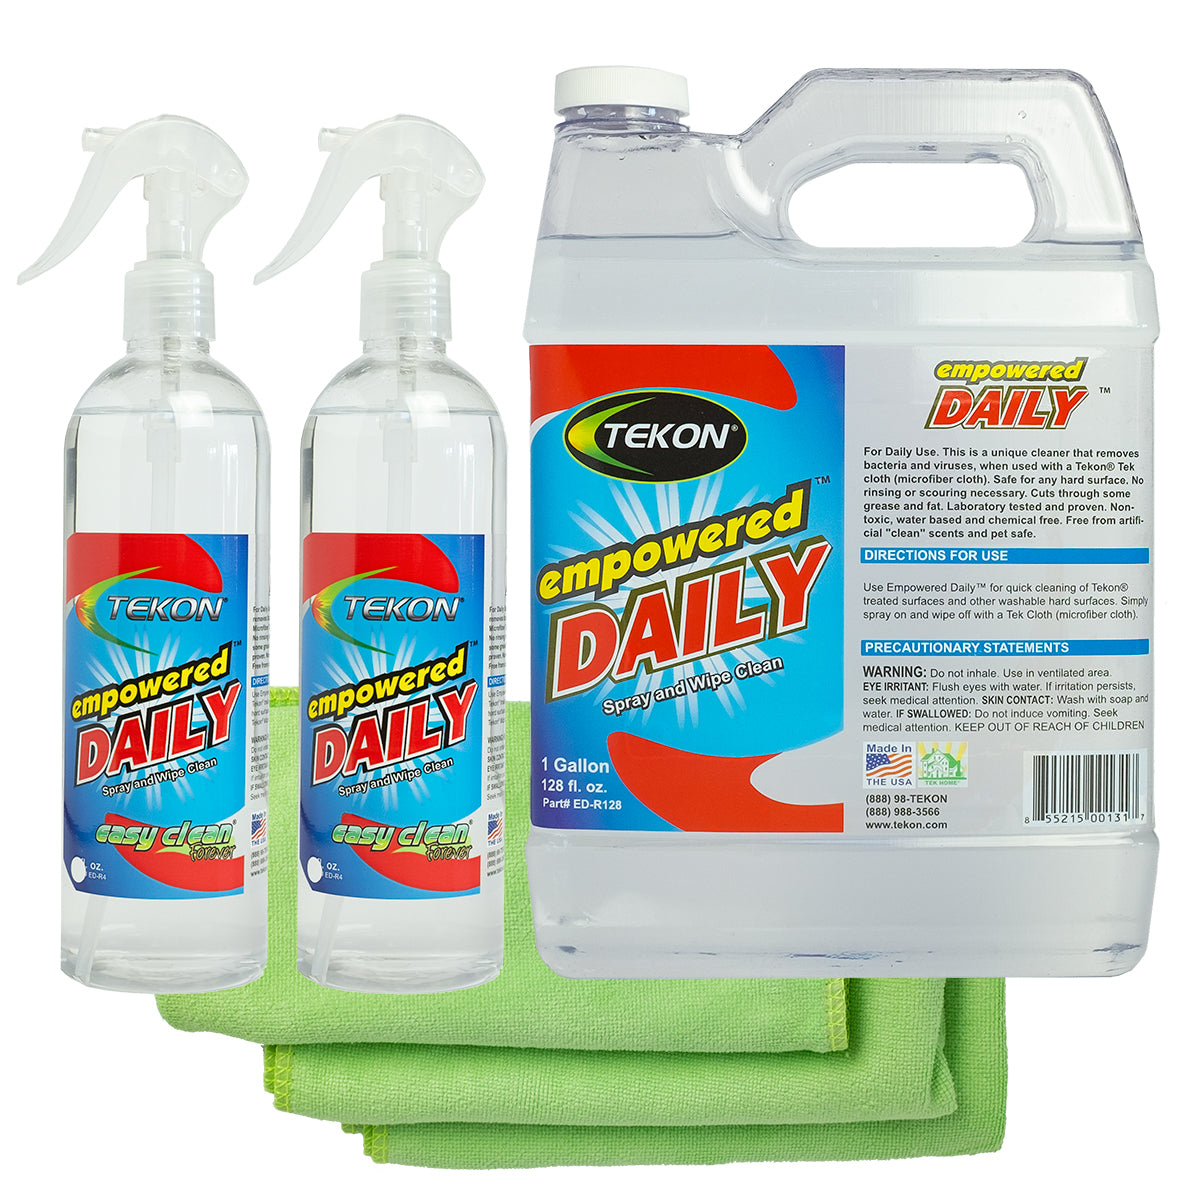 Empowered Daily - General Purpose Cleaner